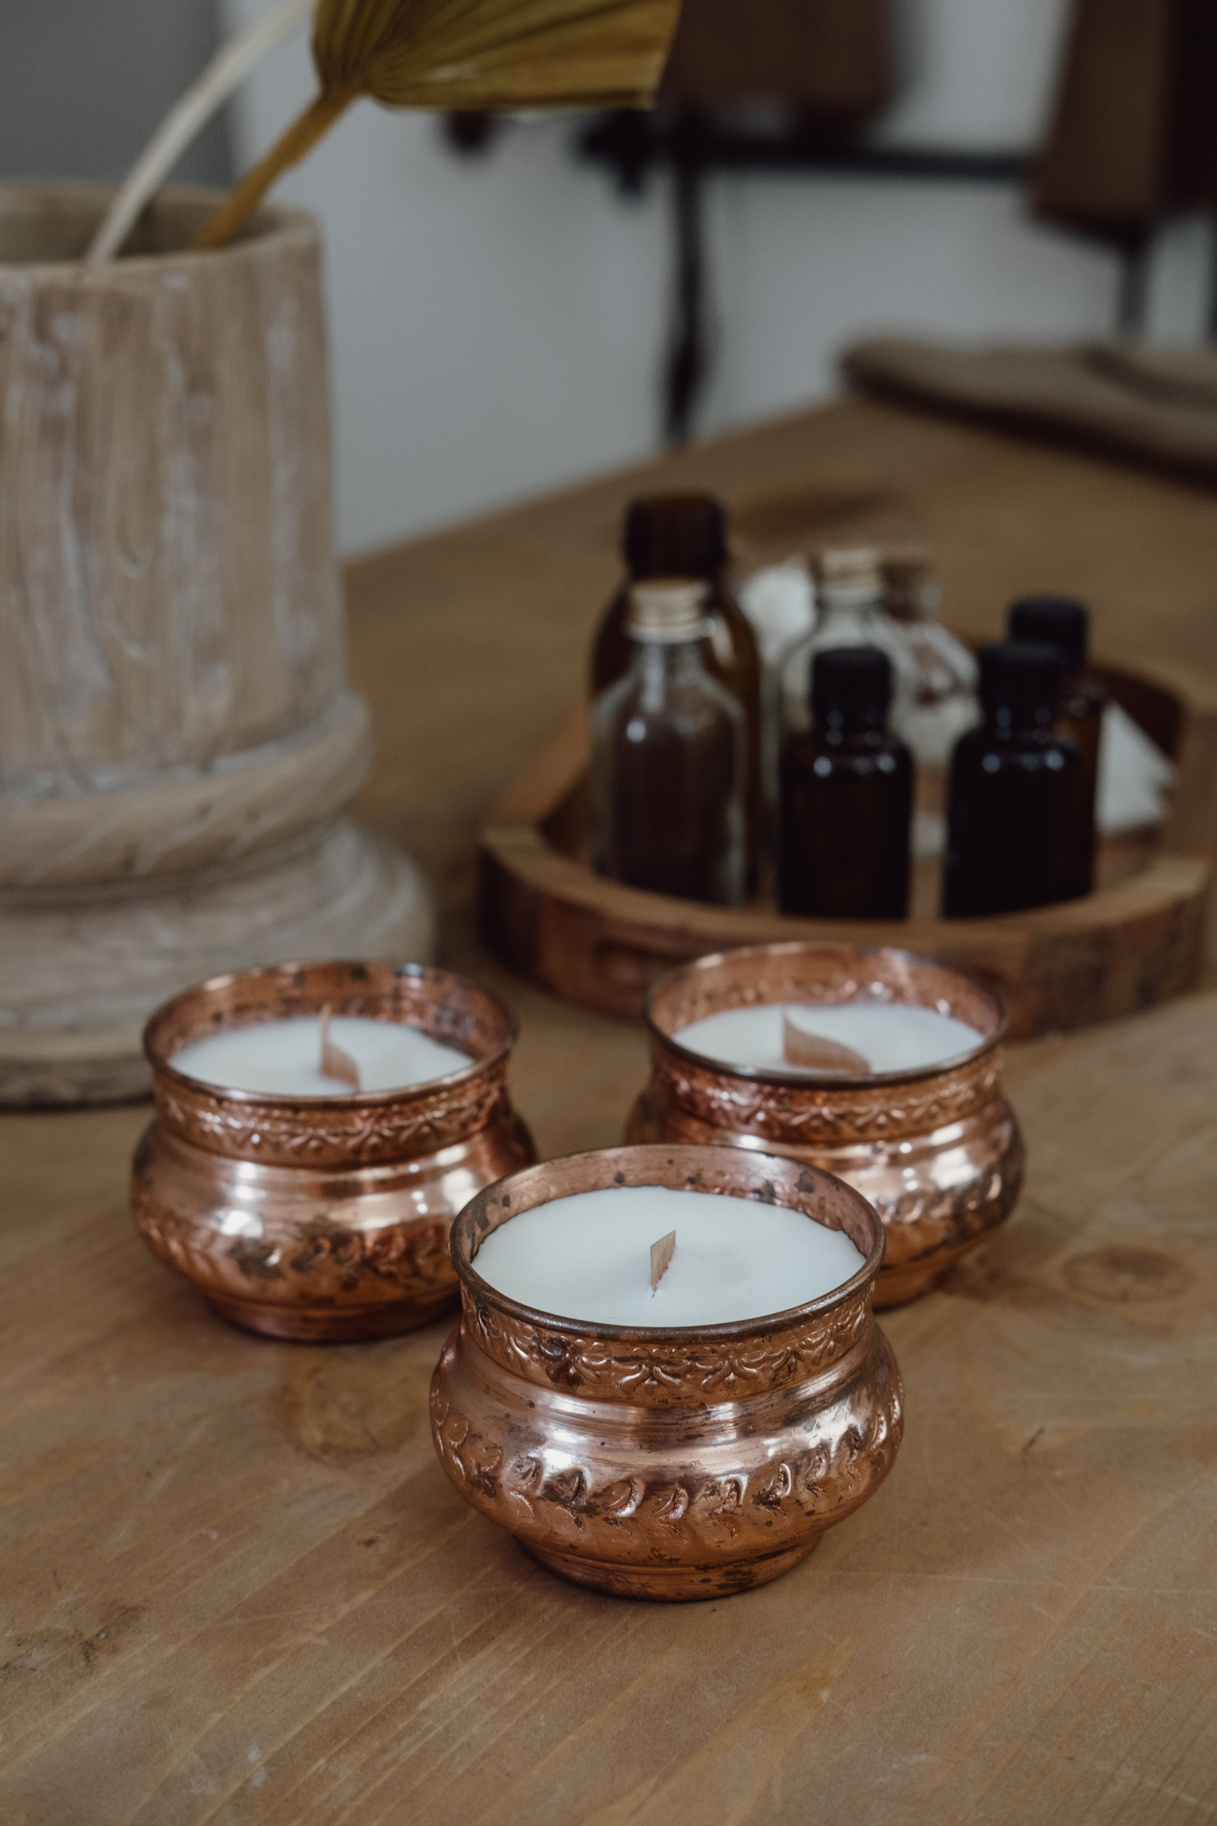 Preparation of Homemade Scented Candles